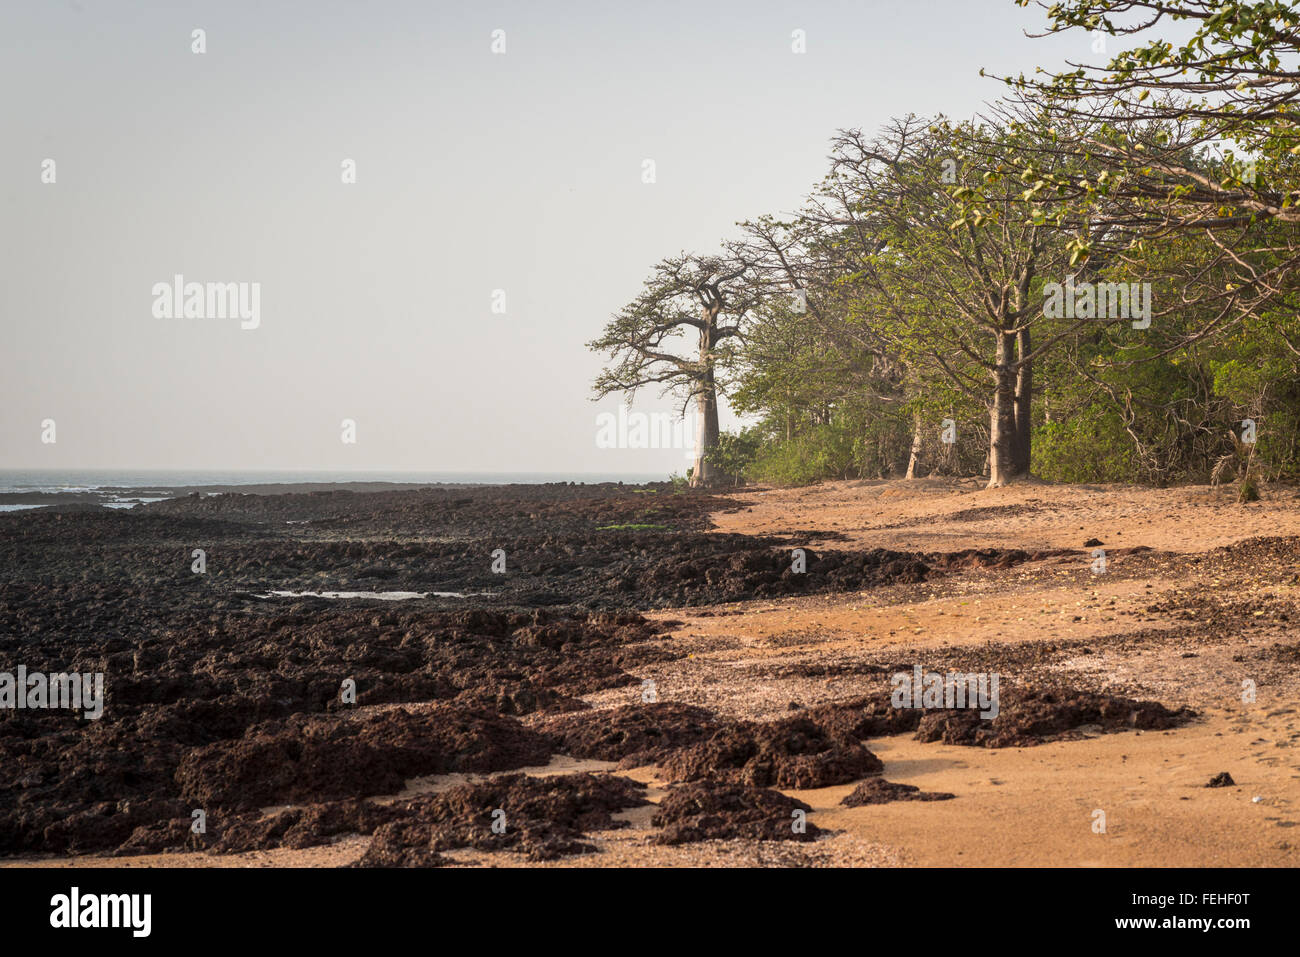 Volcanic rock on the shoreline of the island Poilao in the Bijagos Islands of Guinea Bissau Stock Photo